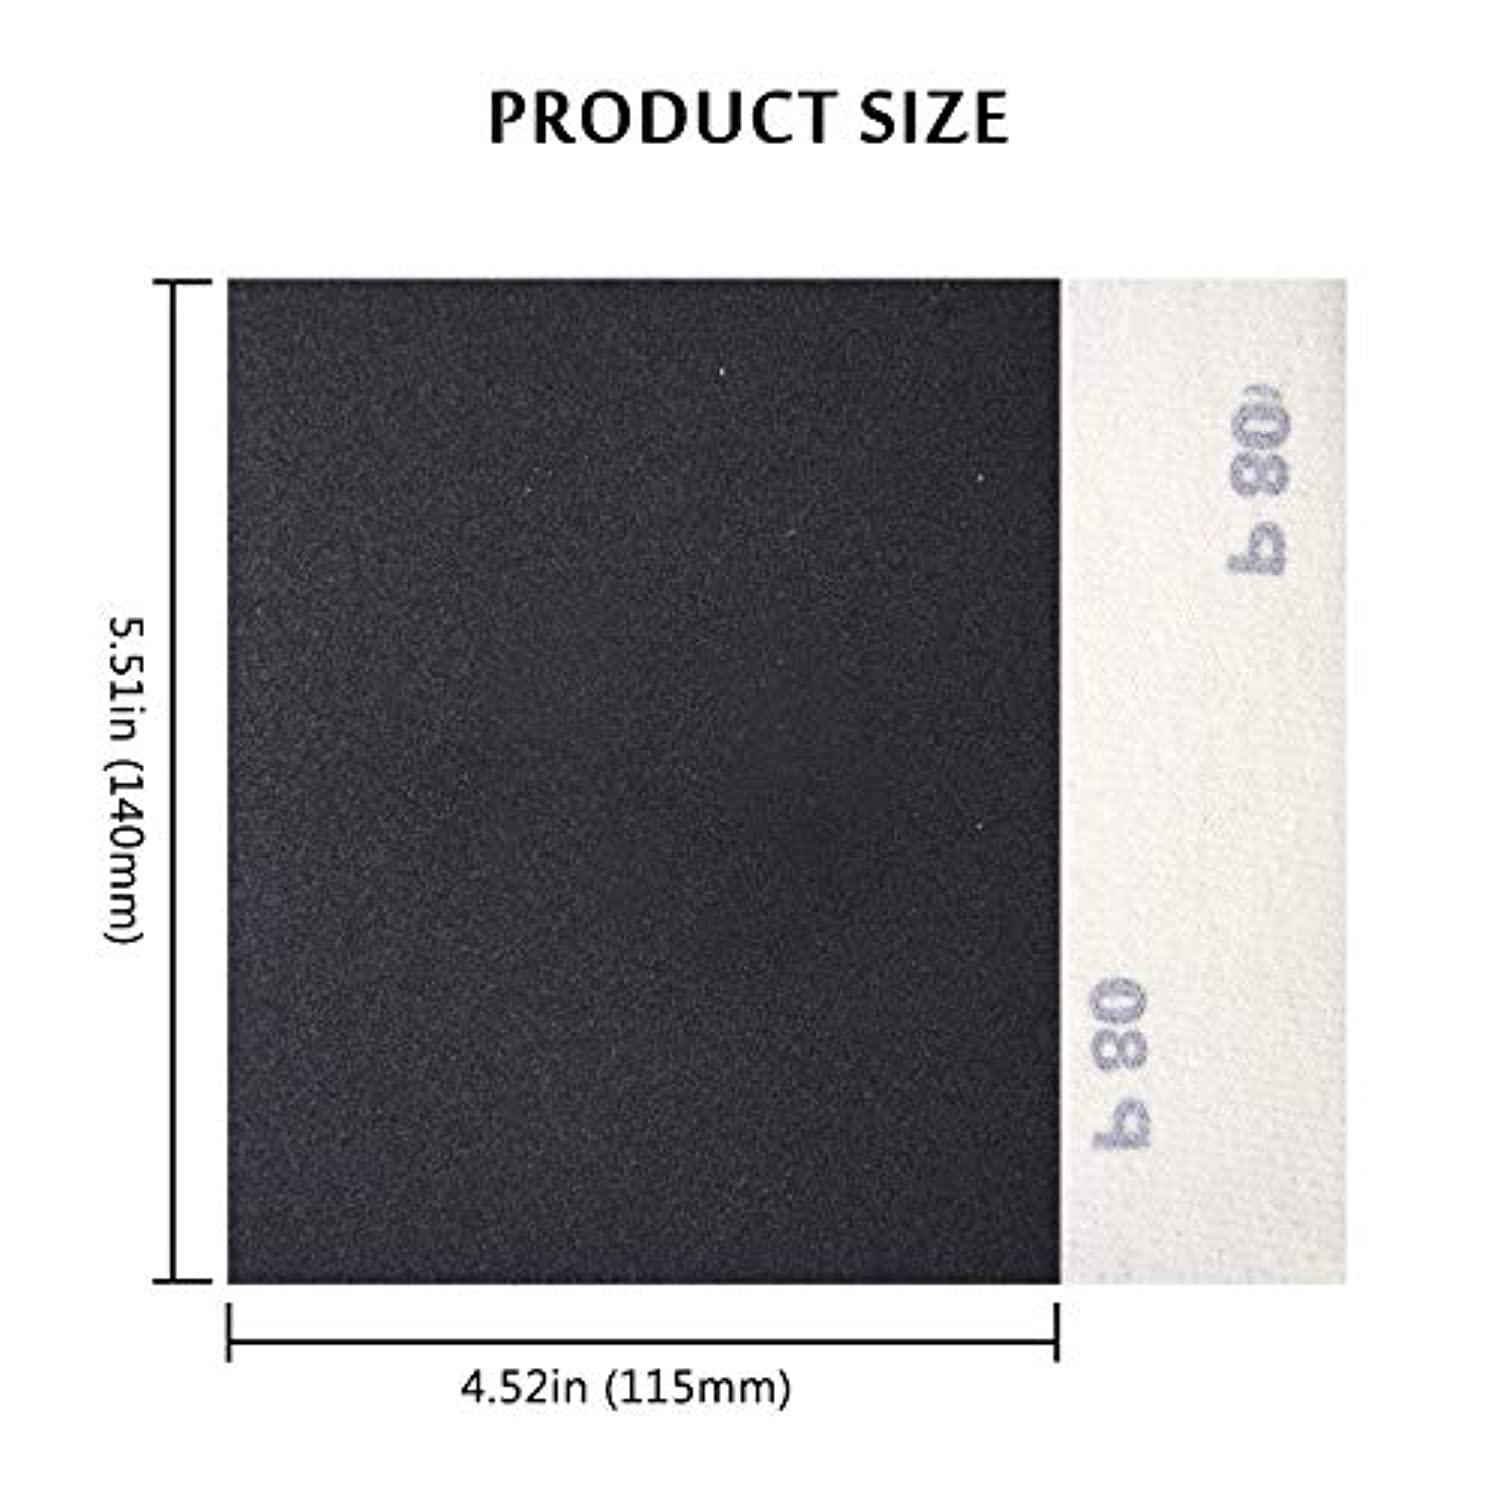 POLIWELL 1/4 sheet sandpaper 80 grit hook & loop or clip on sander sheets high performance waterproof silicon carbide 5.5" x 4.5" sand